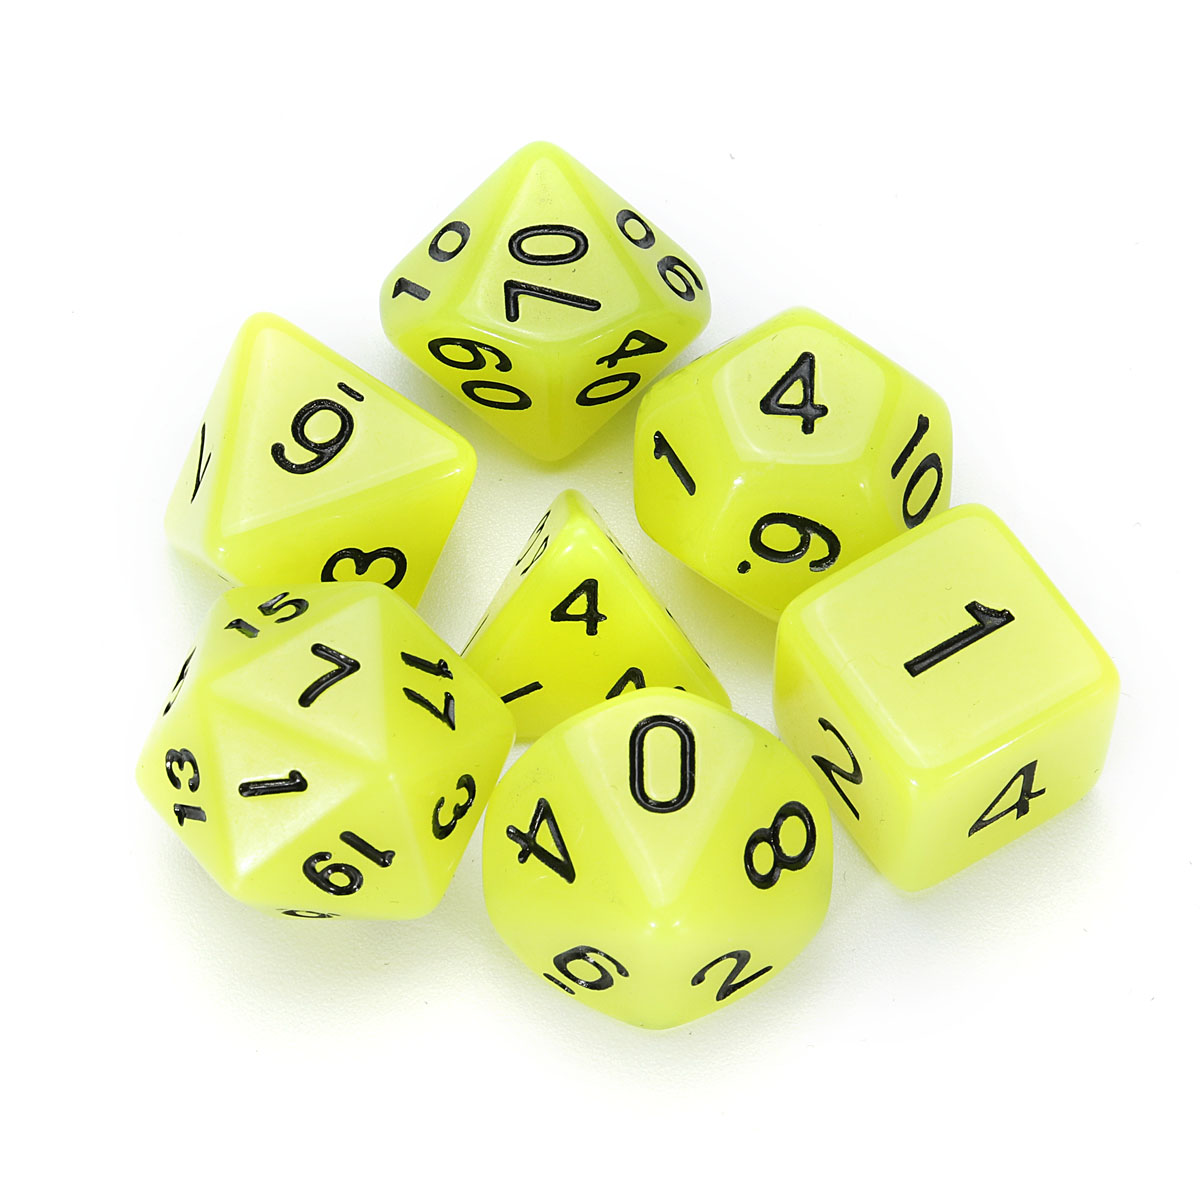 

7 Pcs Luminous Polyhedral Dices Multi-sided Dice Set Polyhedral Dices With Dice Cup RPG Gadget